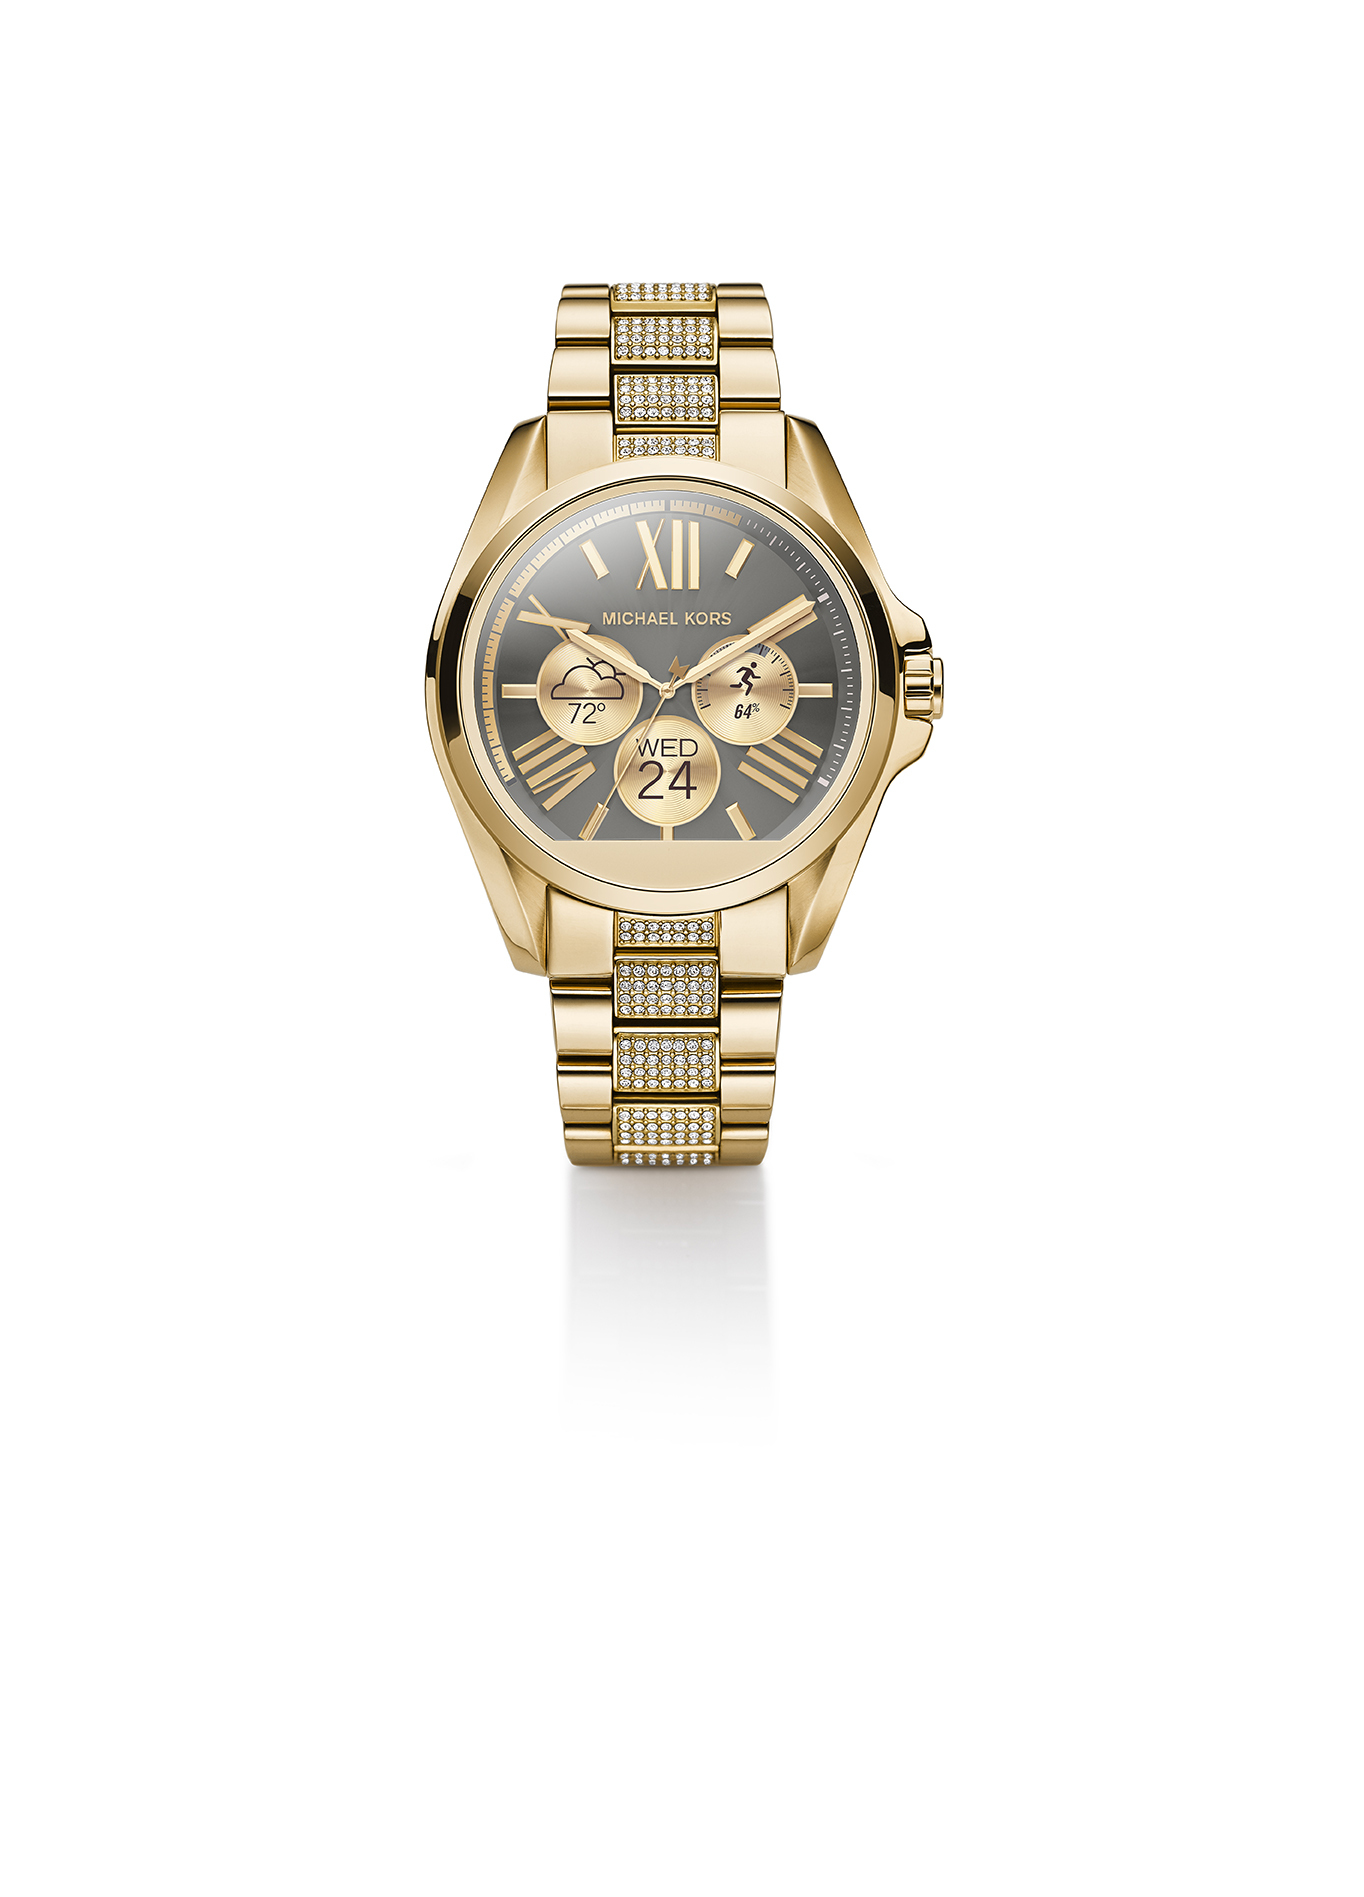 android wear app for michael kors watch